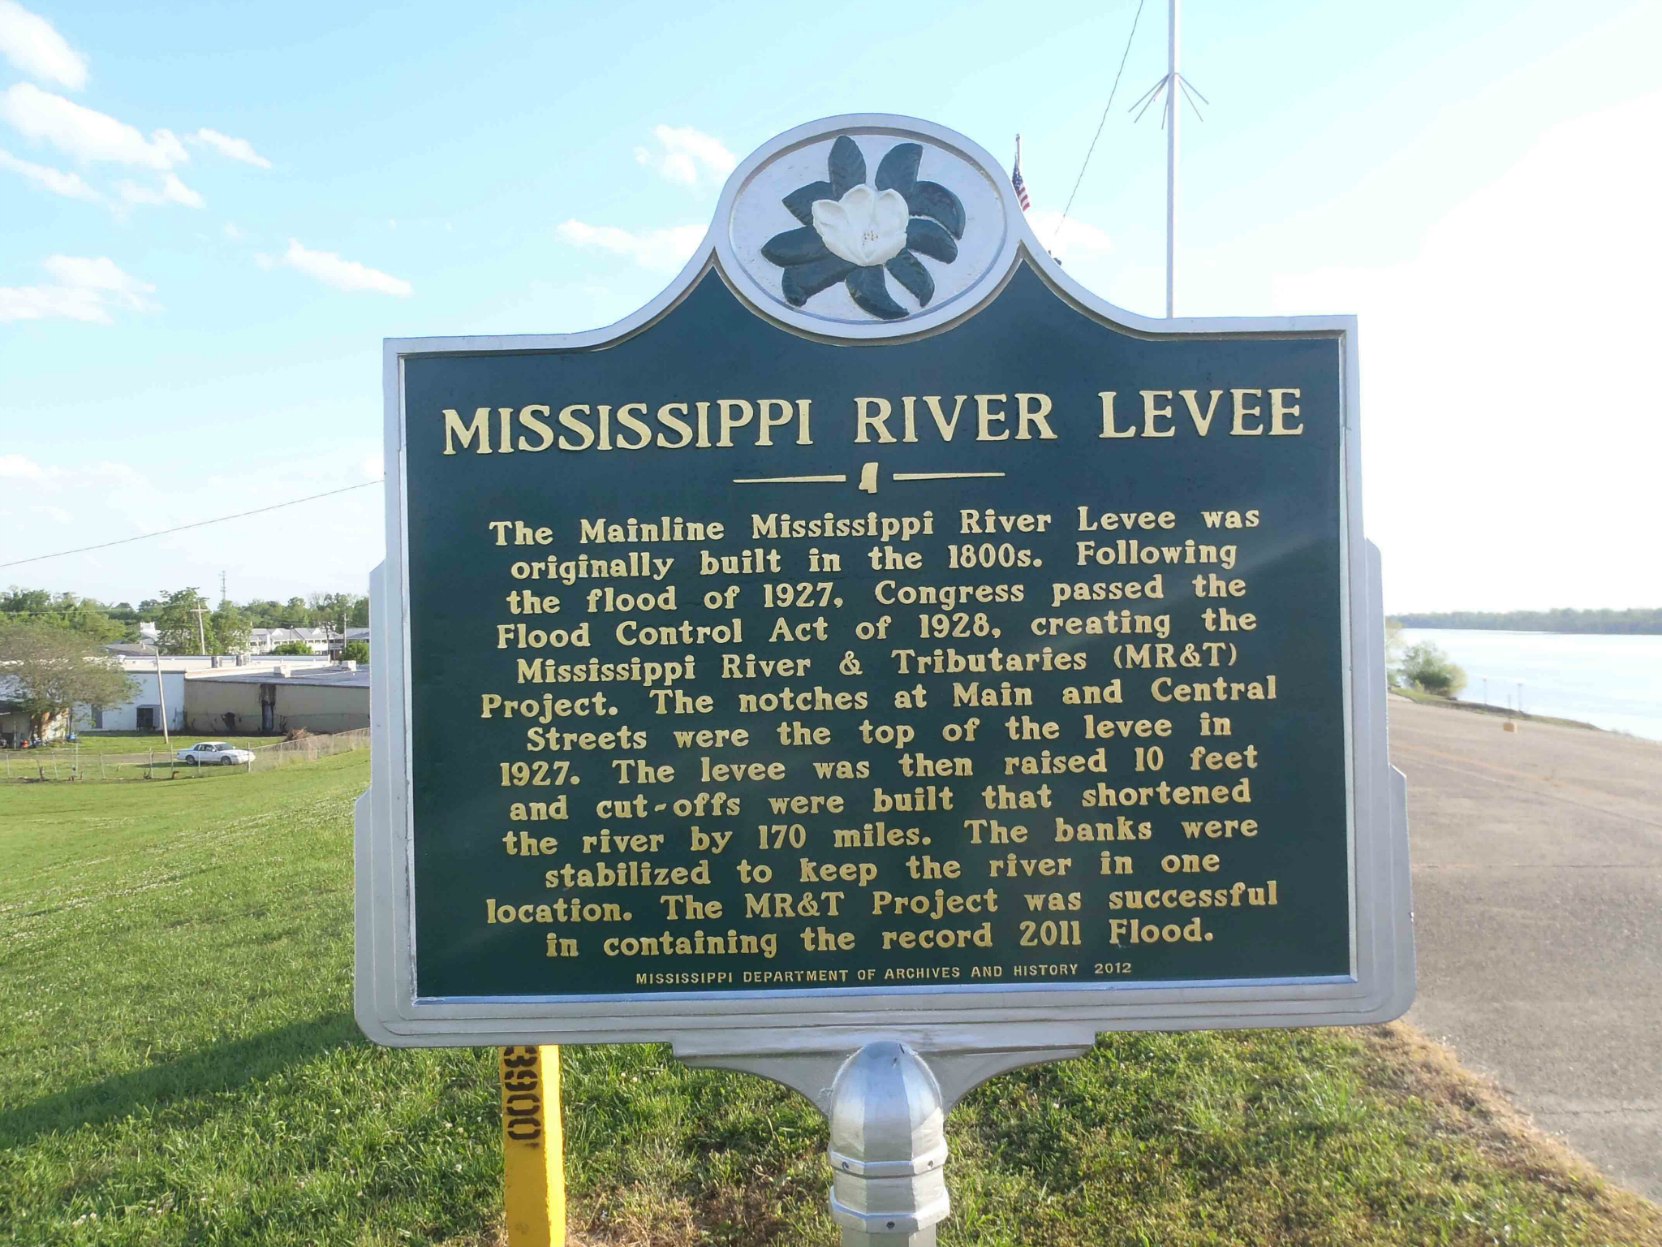 Mississippi Department of Archives & History marker on the levee at Greenville, Mississippi.